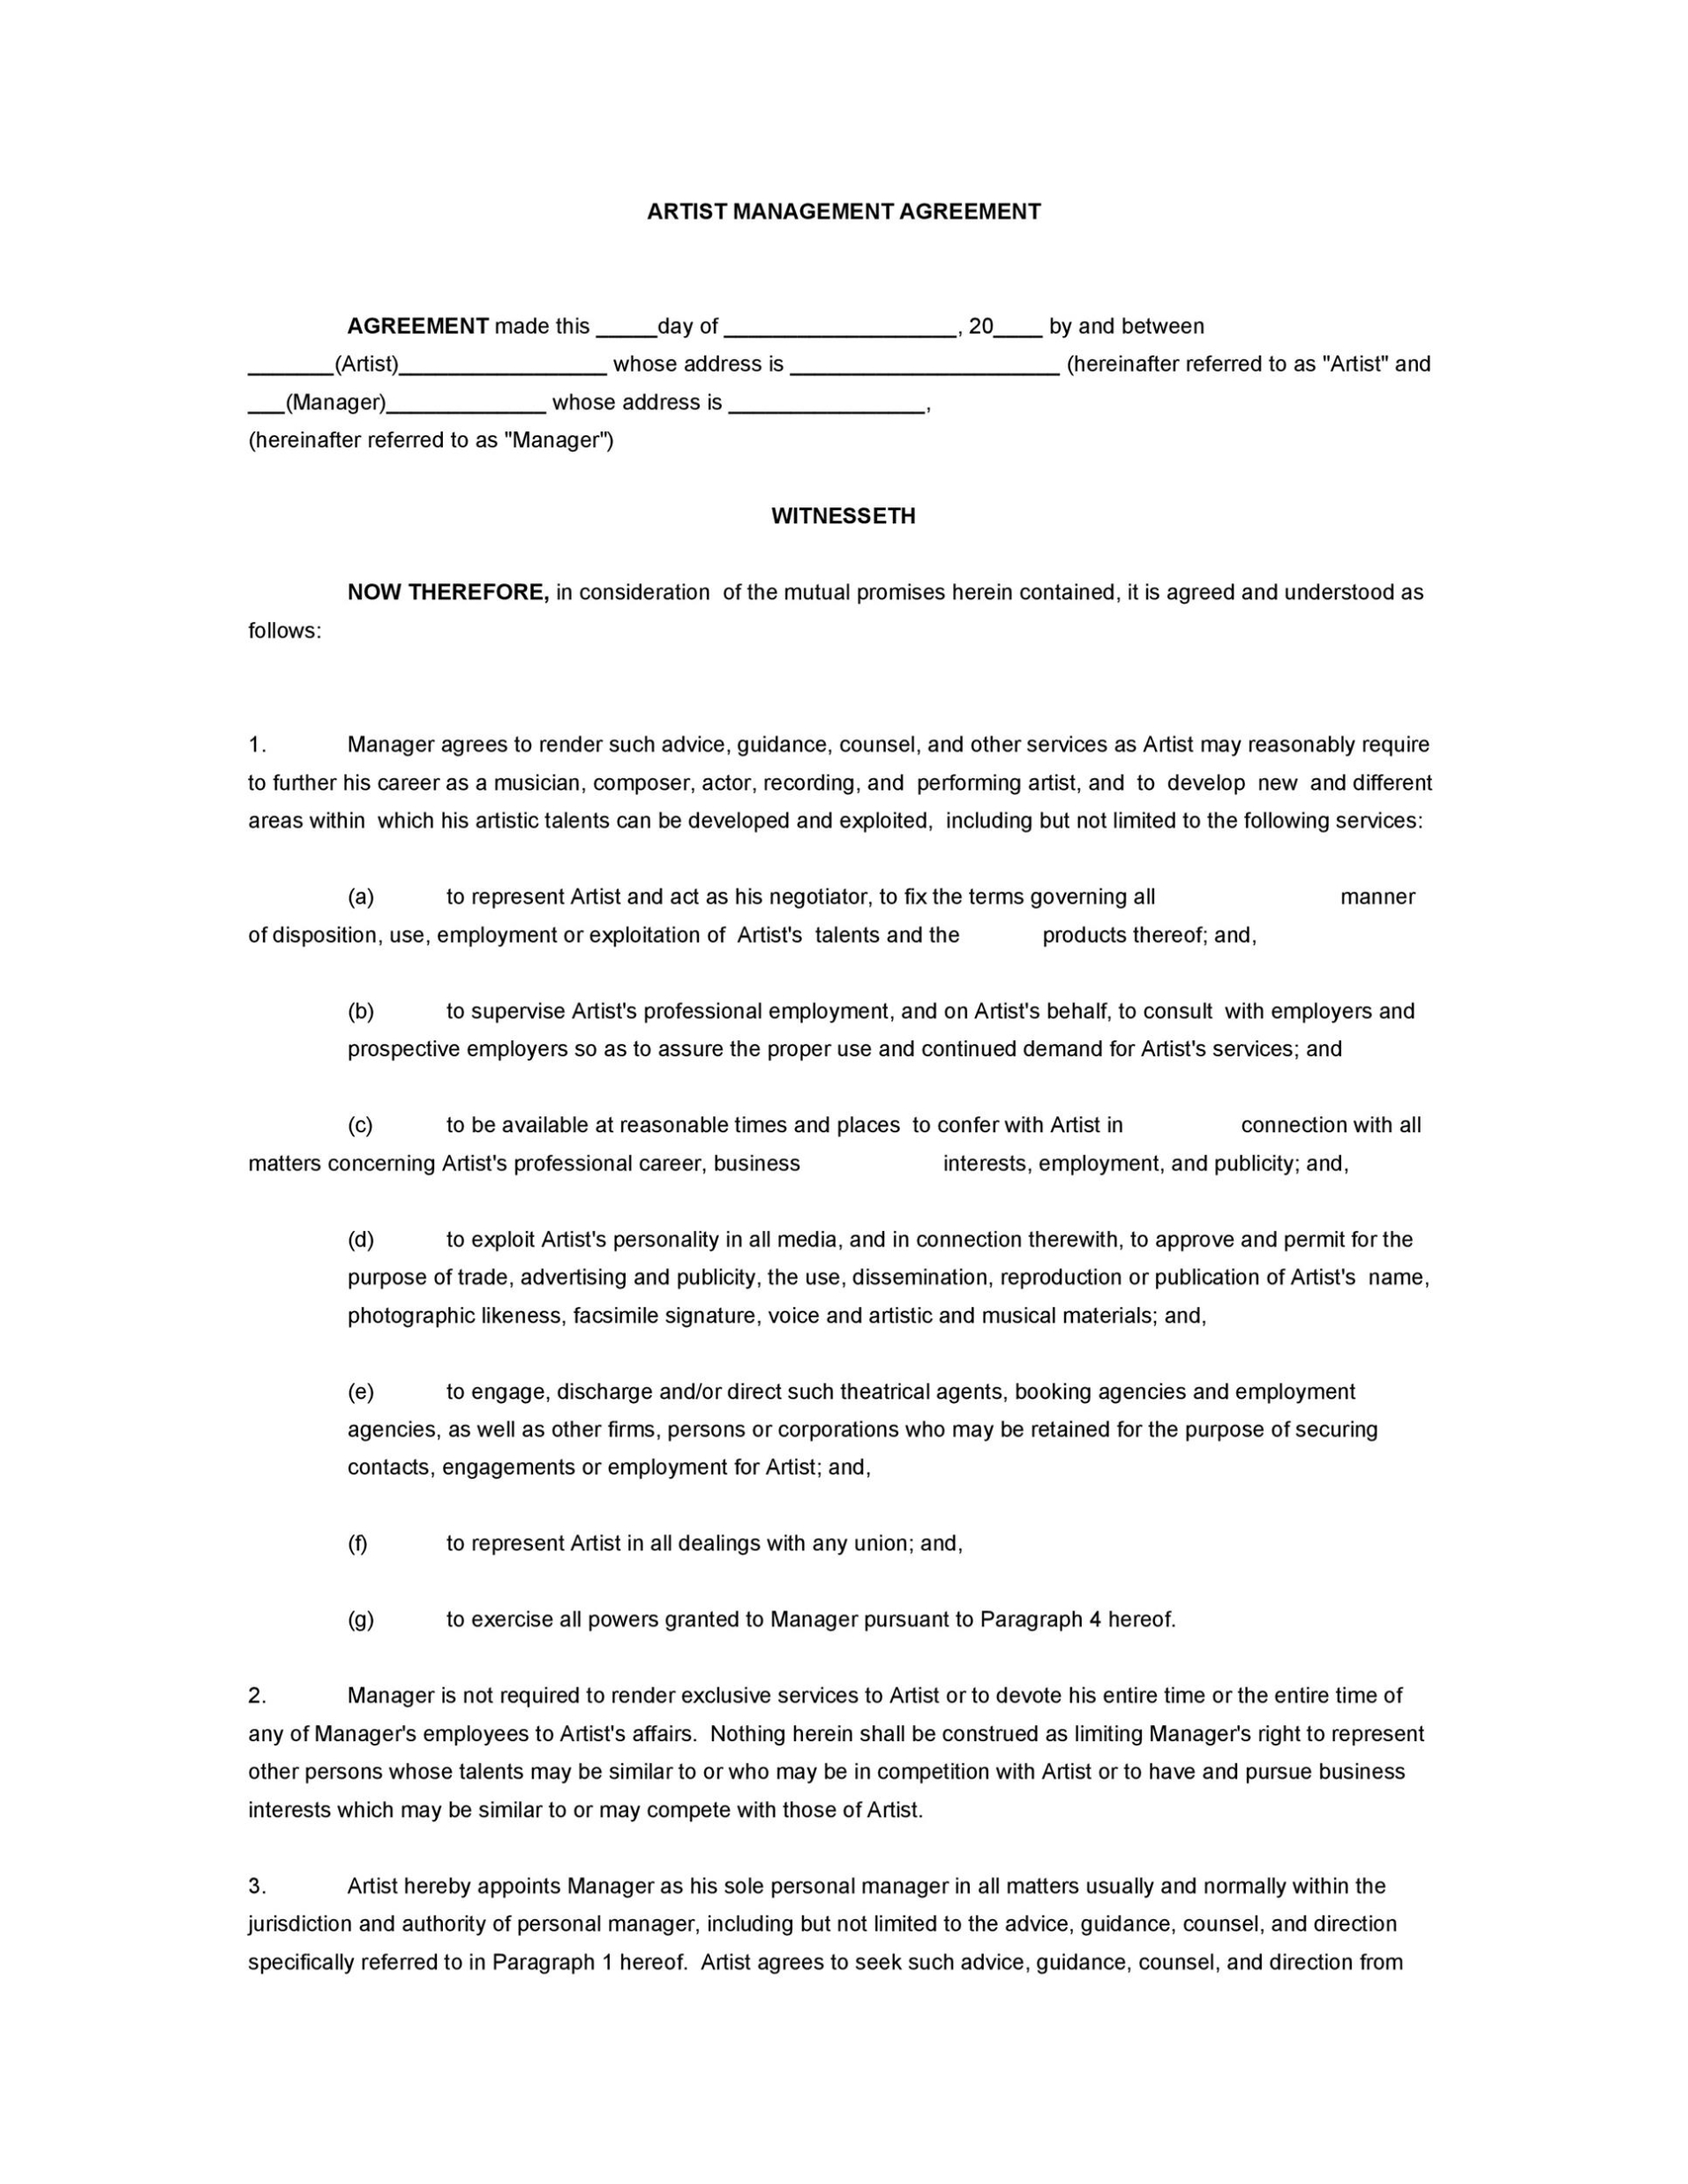 50 Artist Management Contract Templates (Ms Word) ᐅ Templatelab In Talent Management Agreement Template